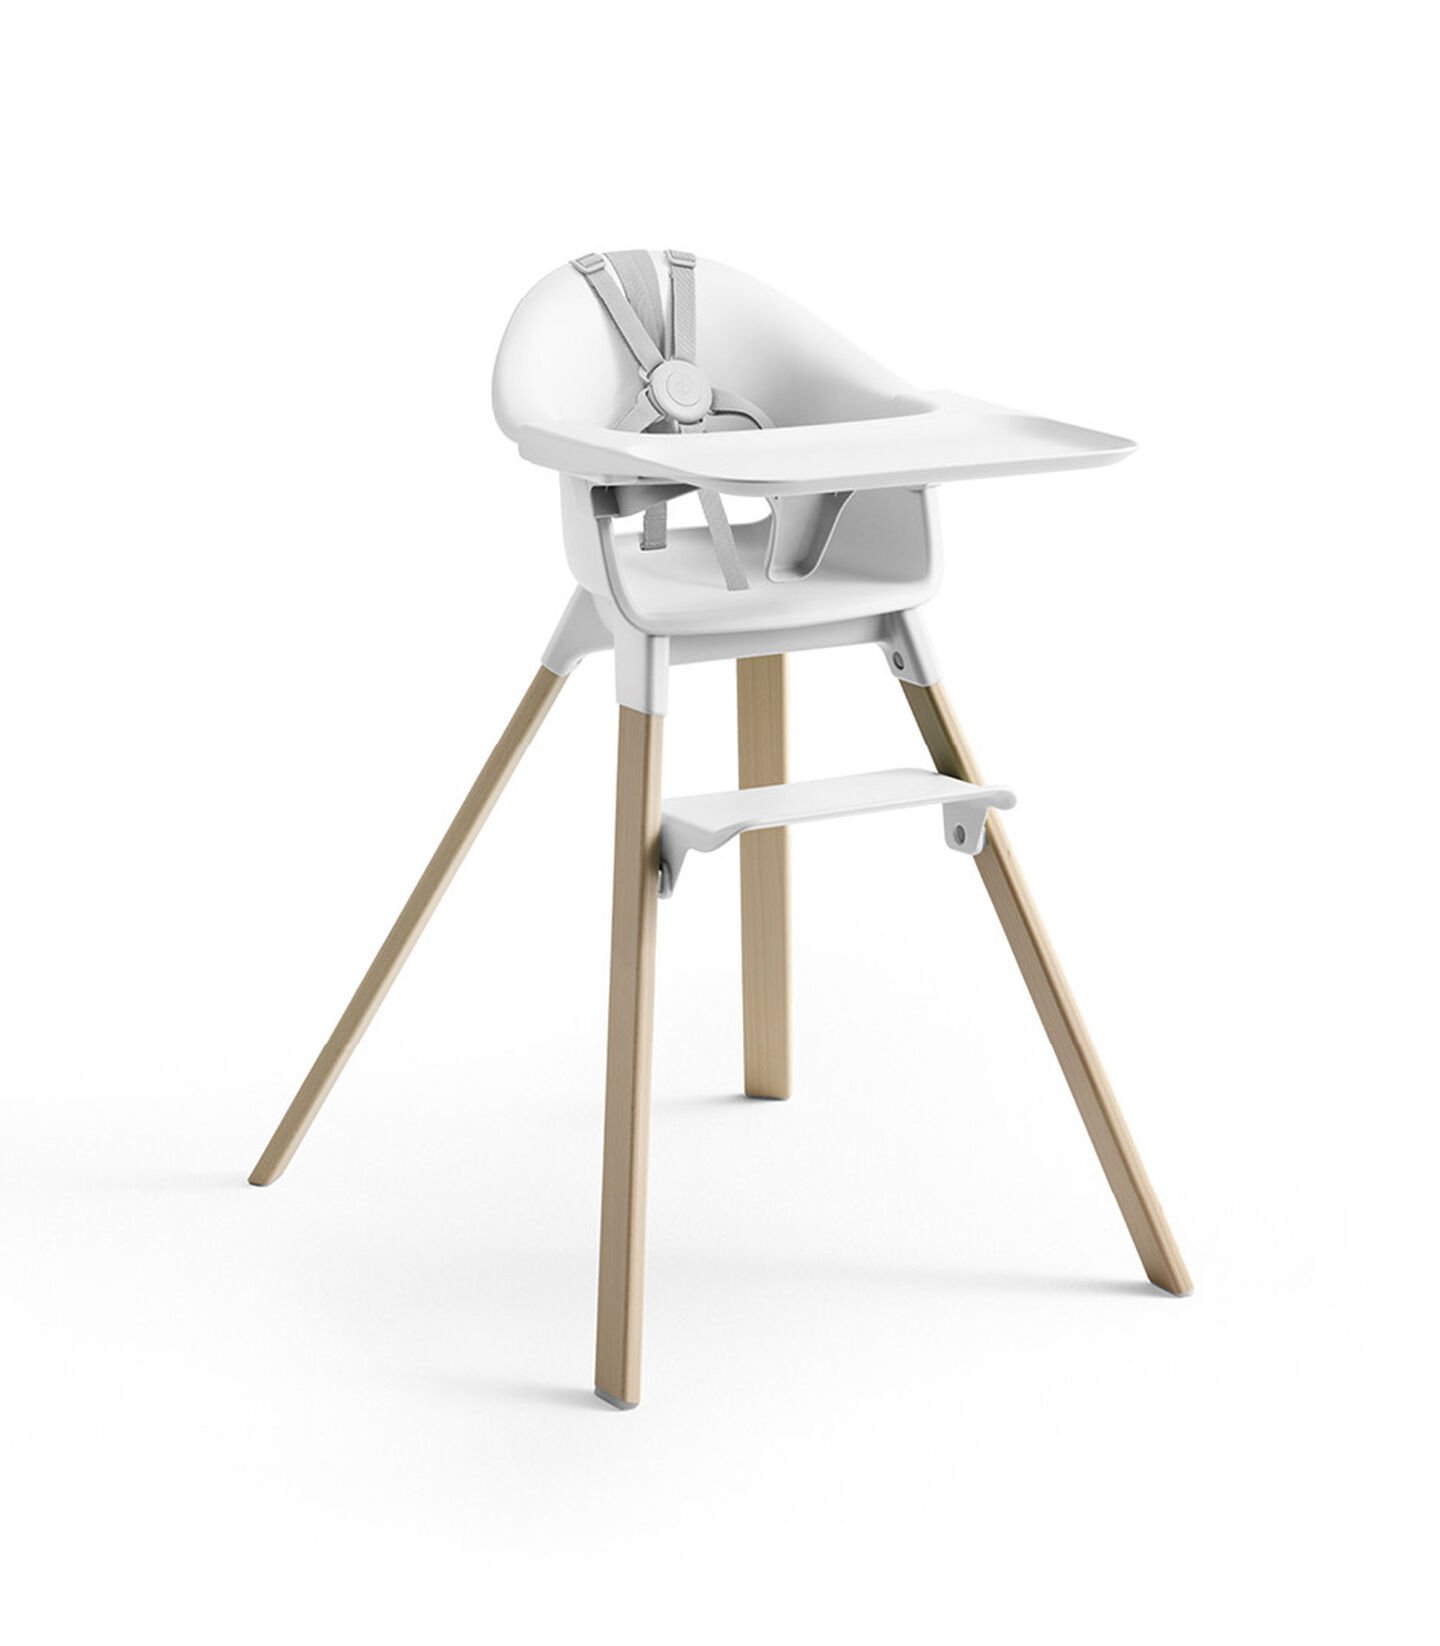 Stokke® Clikk™ High Chair with Tray and Harness, in Natural and White. view 2